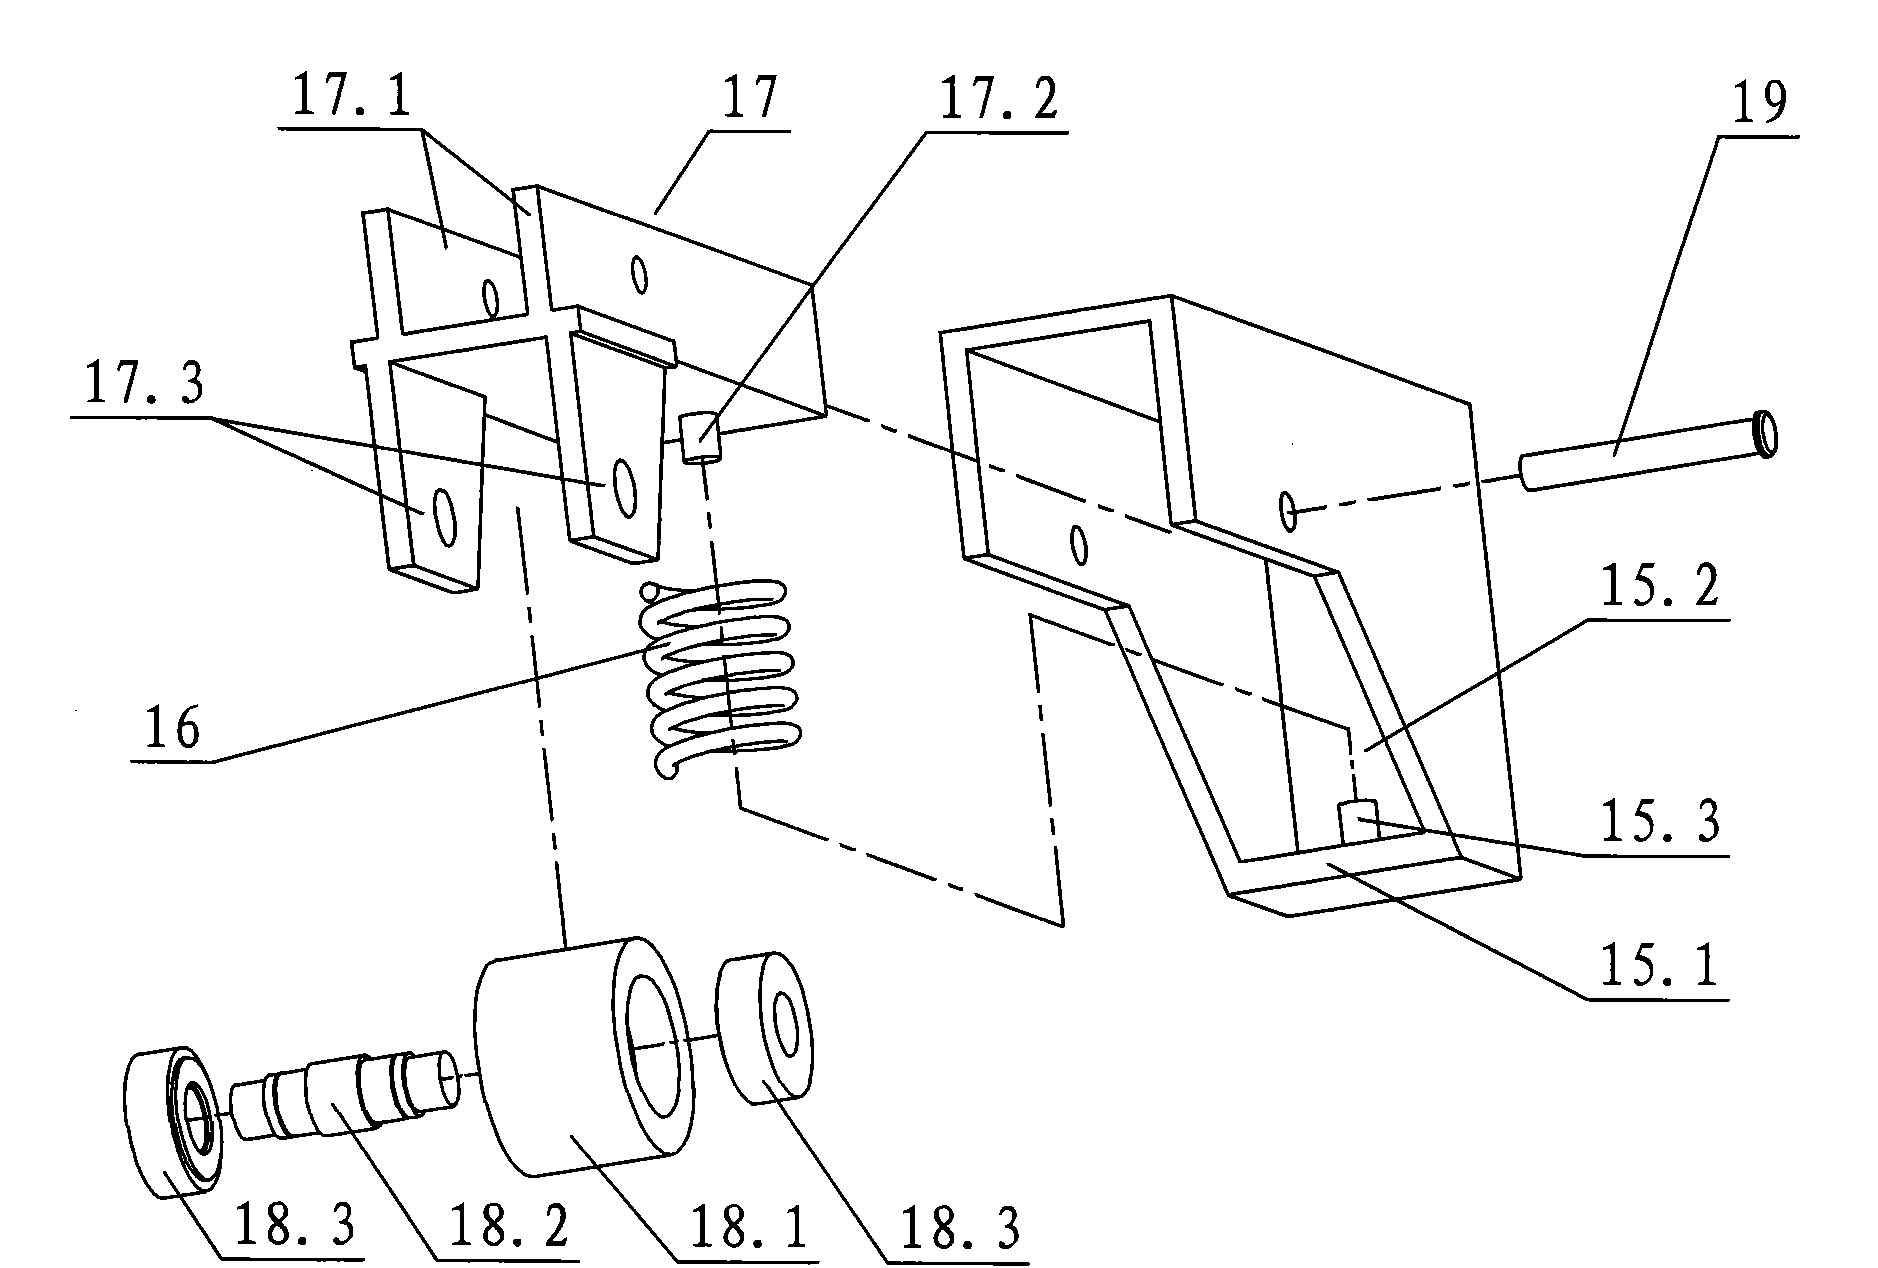 Feeding structure for stone cutter